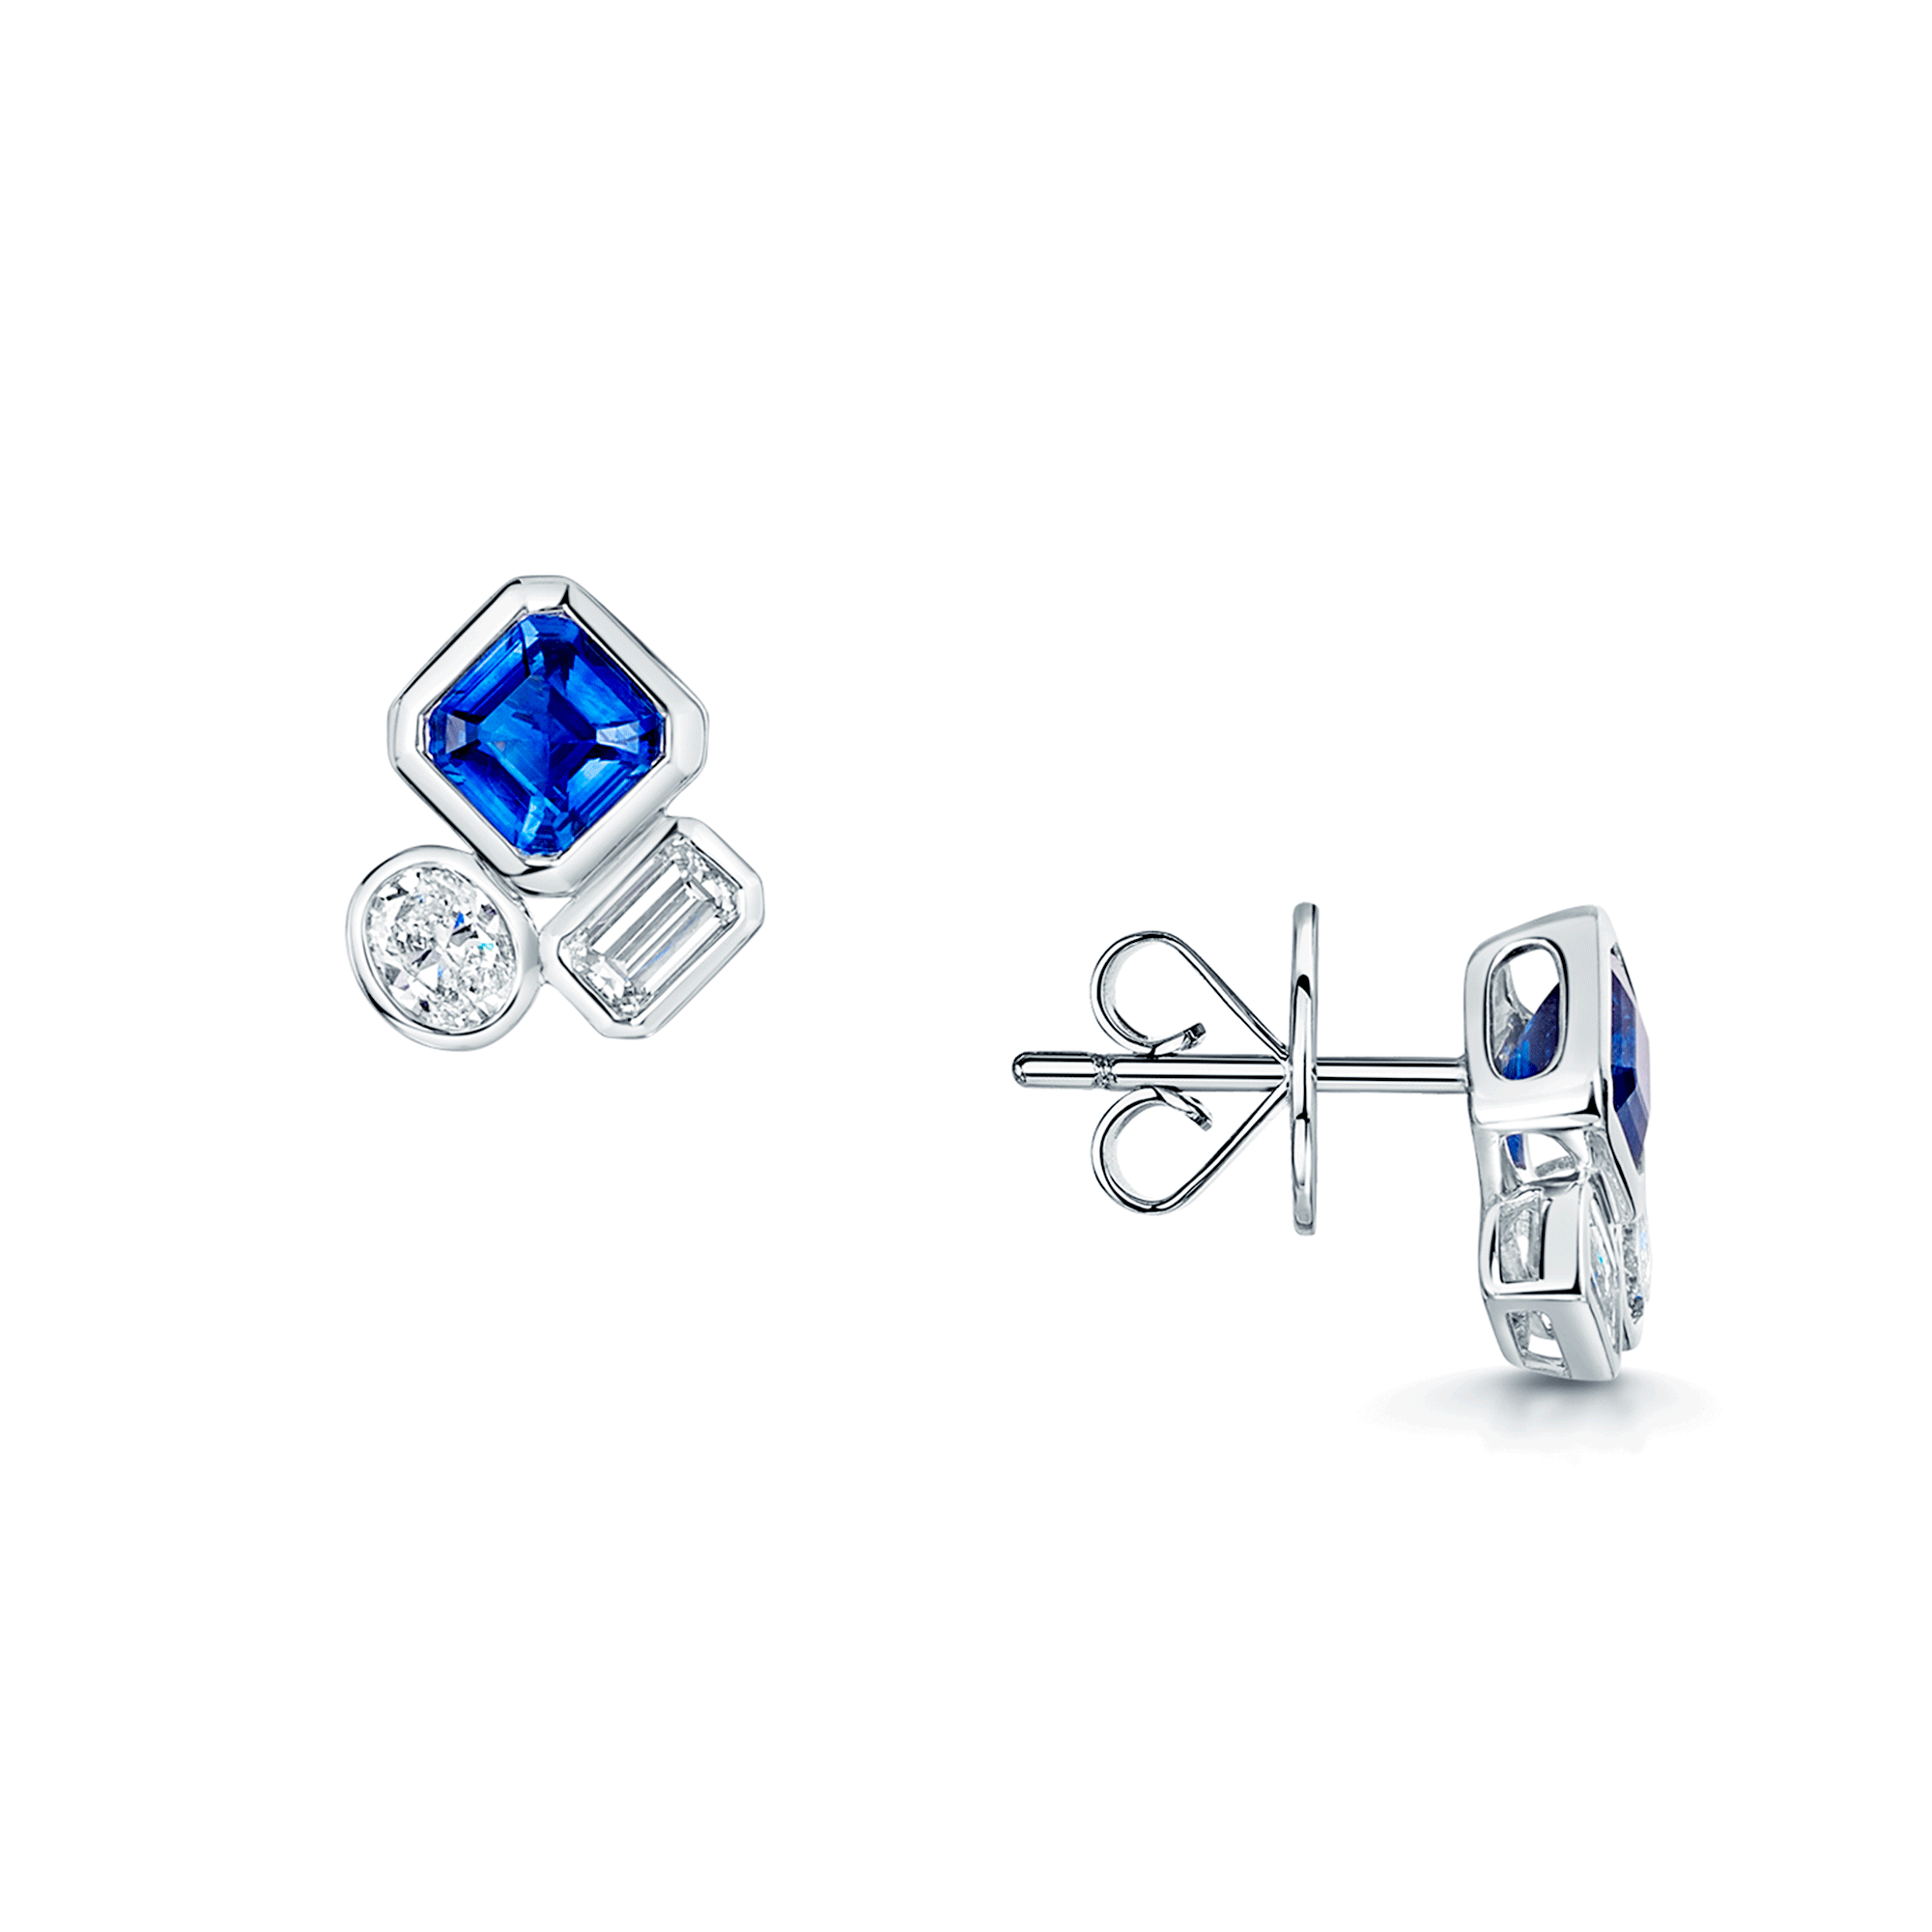 18ct White Gold Mixed Cut Sapphire And Diamond Rub Over Stud Earrings